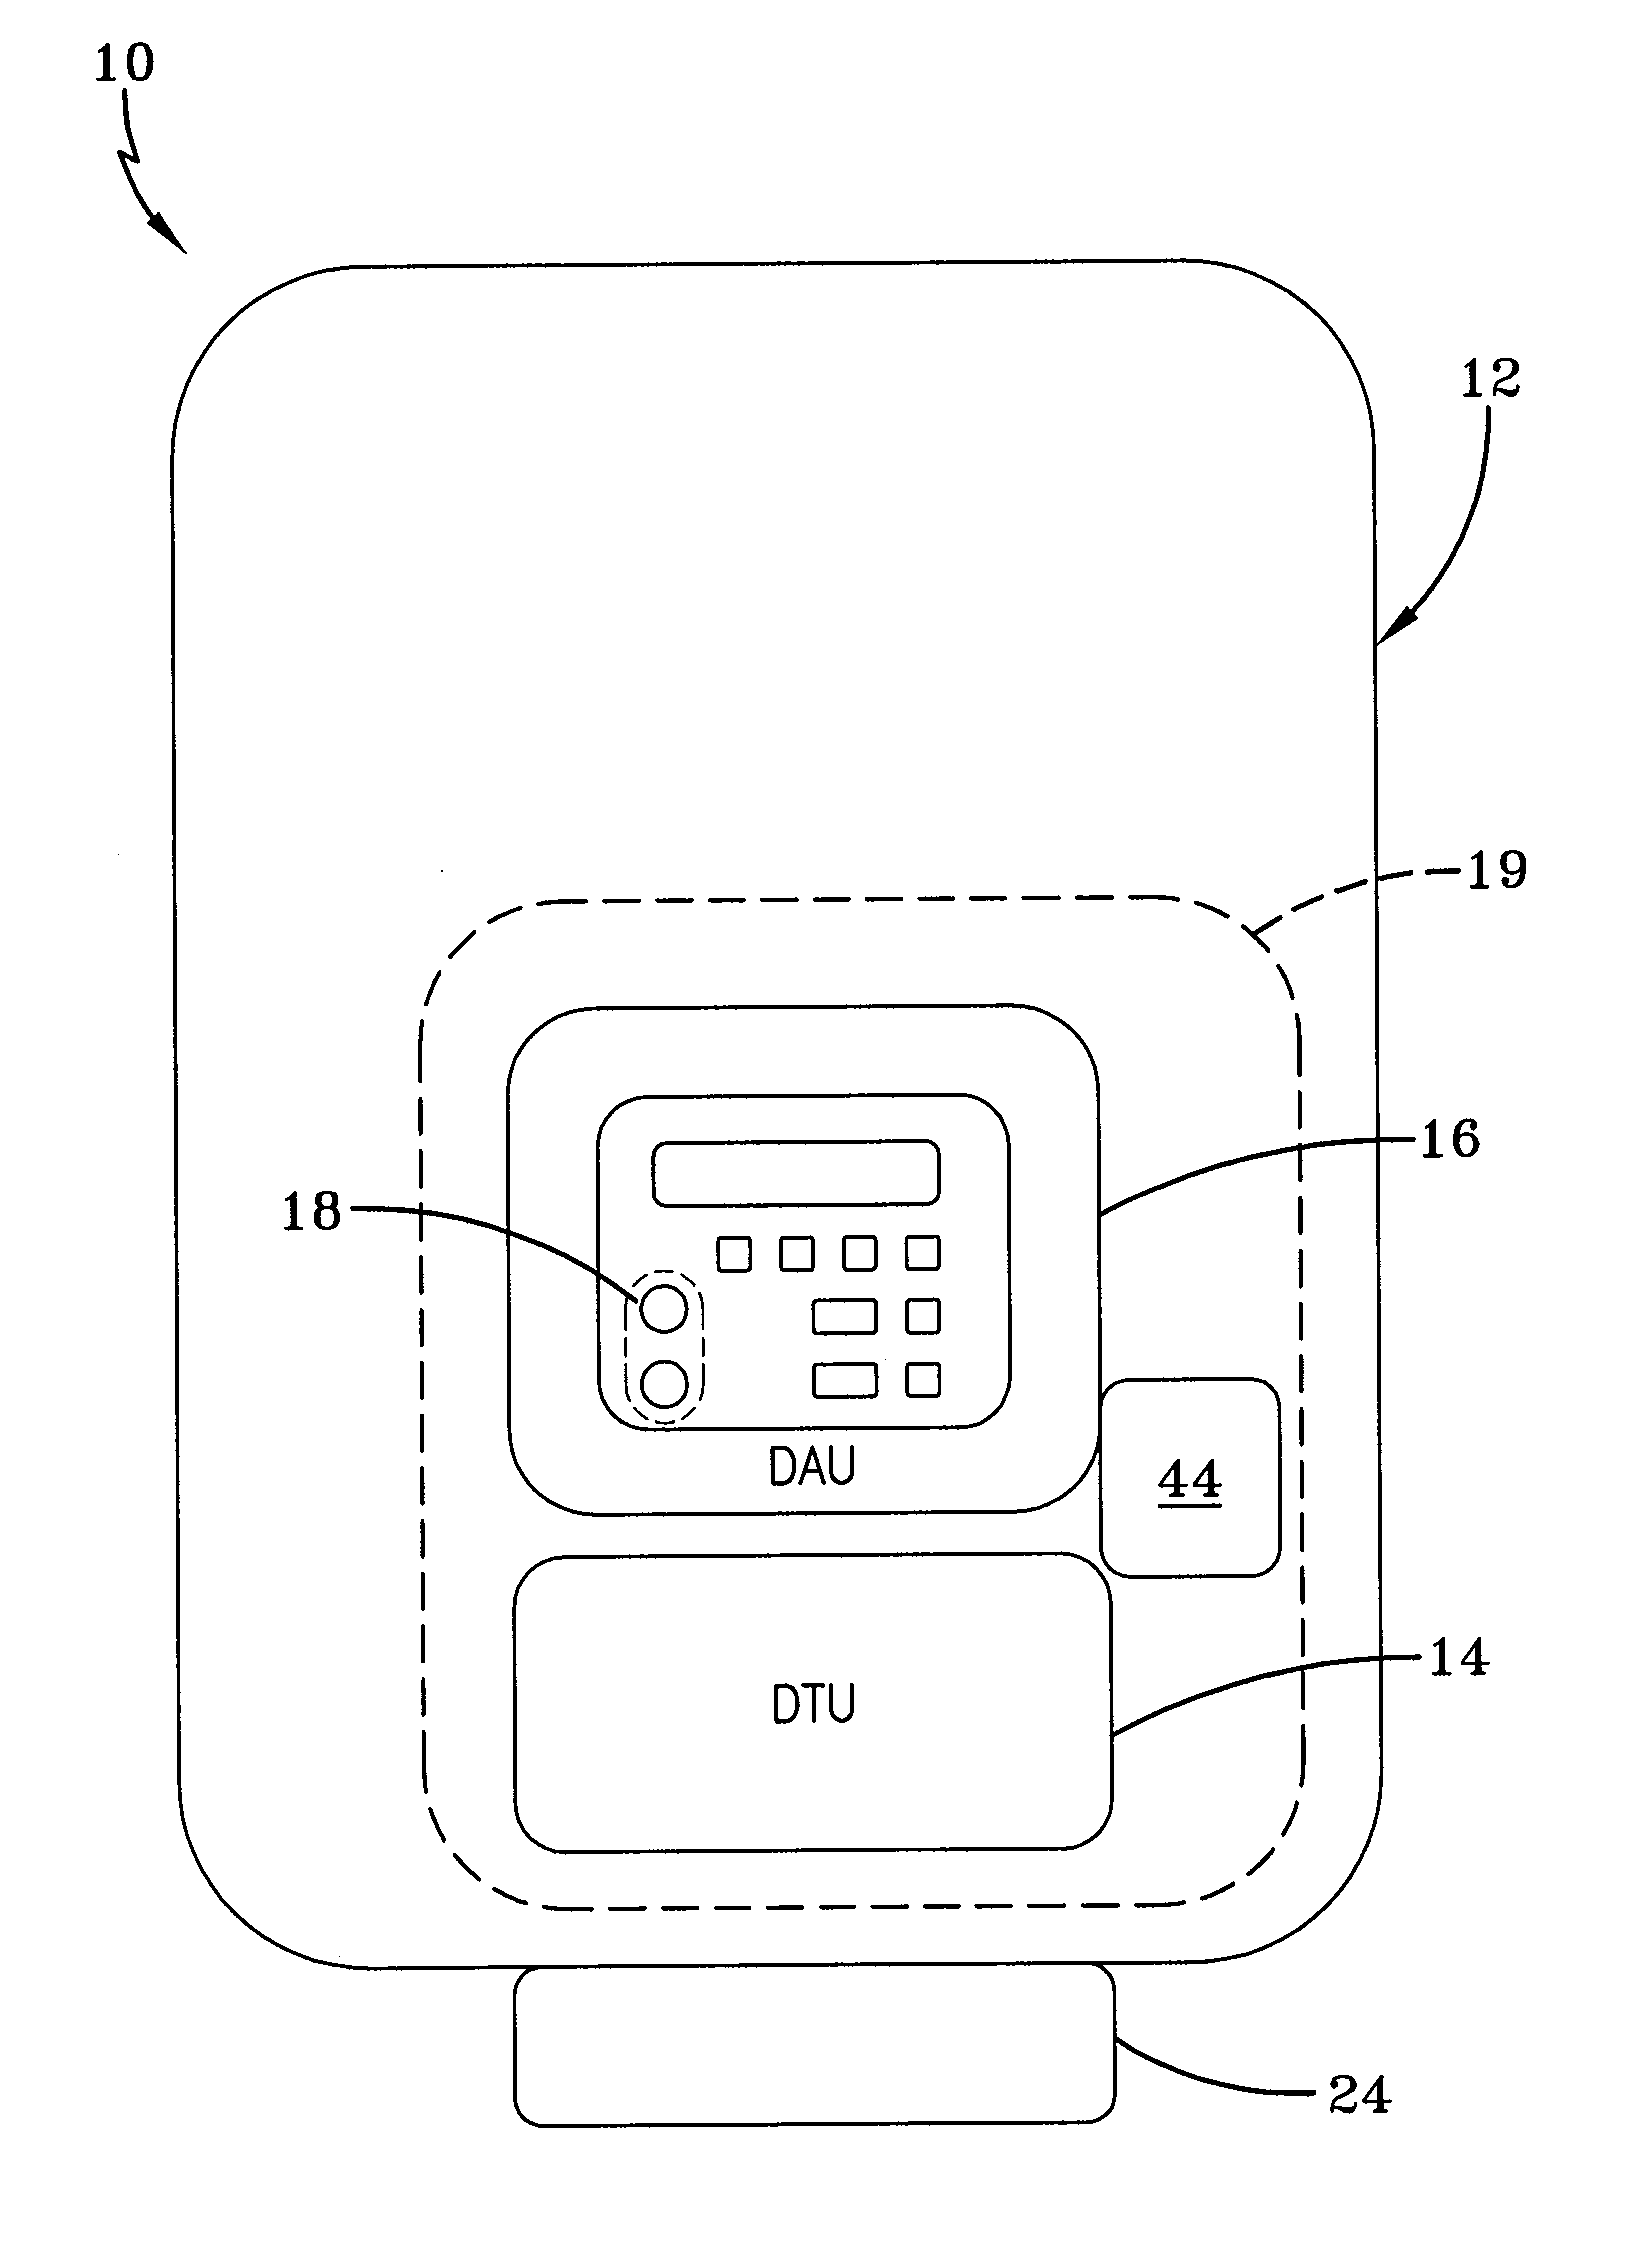 Hygiene compliance monitoring system